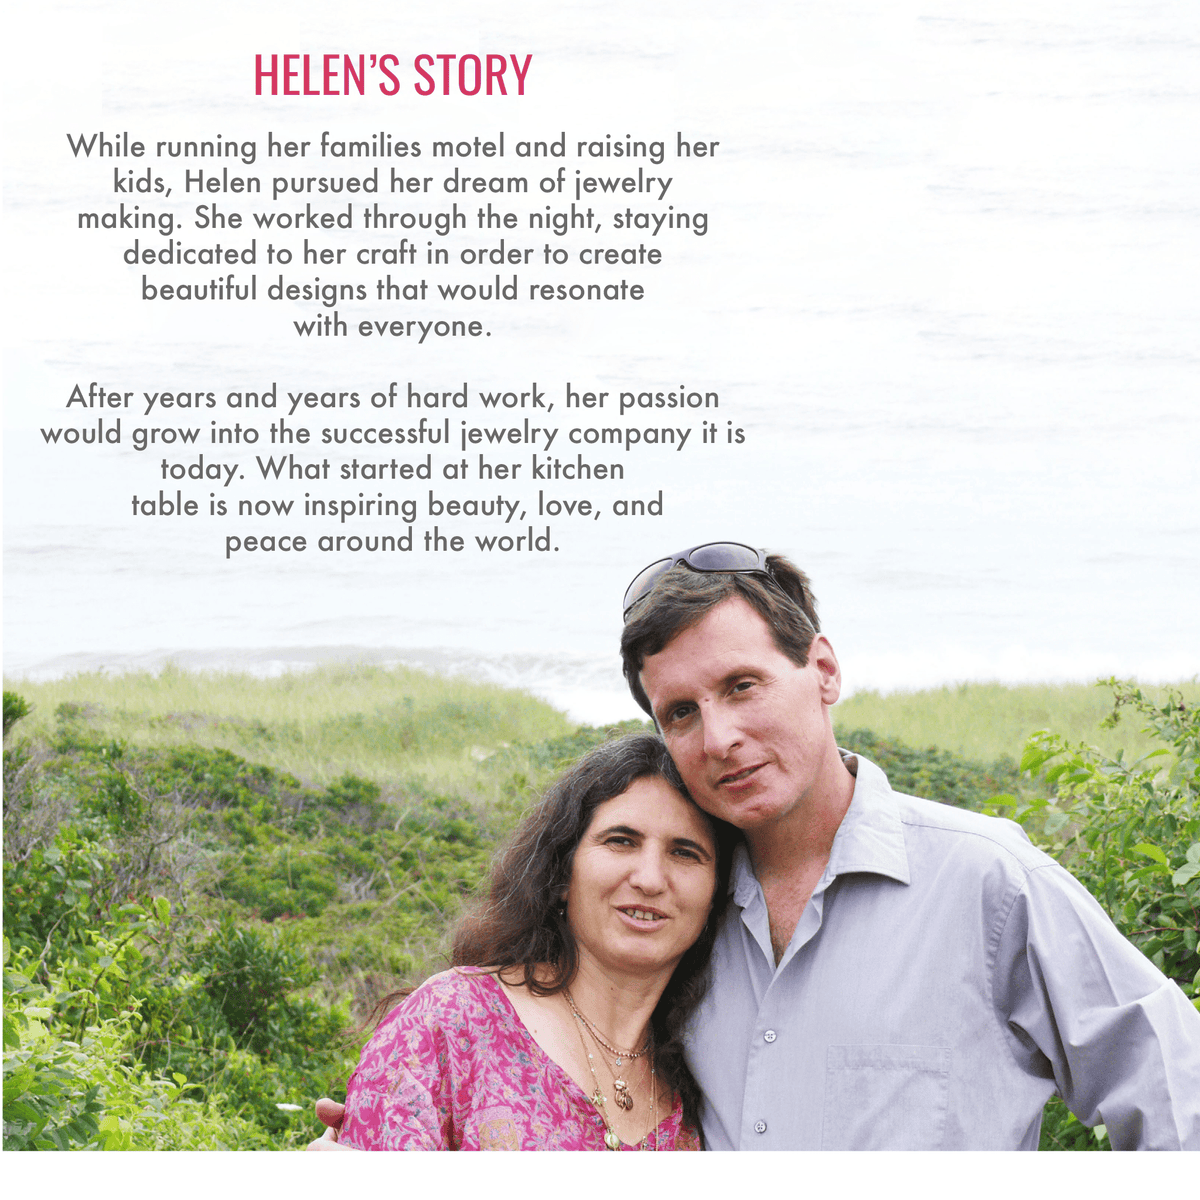 Helen’s story. While running her family's motel and raising her kids, Helen pursued her dream of jewelry making. She worked through the night, staying dedicated to her craft in order to create beautiful designs that would resonate with everyone. After years and years of hard work, her passion would grow into the successful jewelry company it is today. What started at her kitchen table is now inspiring beauty, love, and peace around the world.